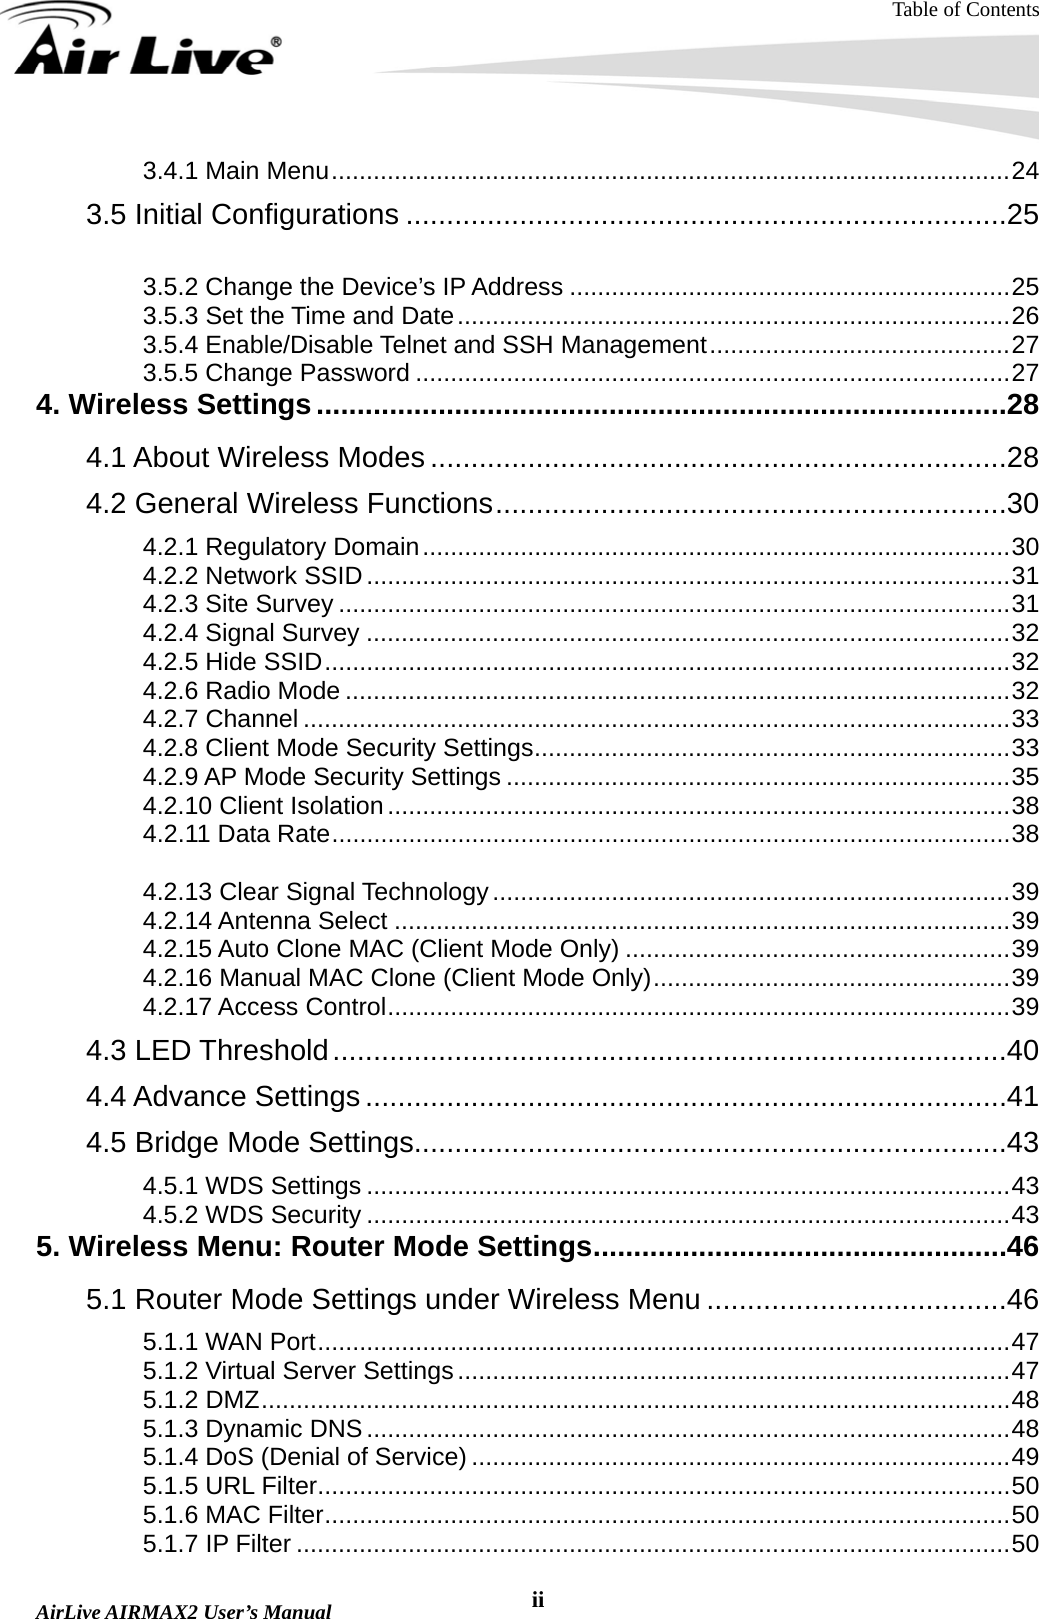 Table of Contents  AirLive AIRMAX2 User’s Manual  ii3.4.1 Main Menu.................................................................................................24 3.5 Initial Configurations ..........................................................................25 3.5.1 Changing the Regulatory Domain..............................................................25 3.5.2 Change the Device’s IP Address ...............................................................25 3.5.3 Set the Time and Date...............................................................................26 3.5.4 Enable/Disable Telnet and SSH Management...........................................27 3.5.5 Change Password .....................................................................................27 4. Wireless Settings.....................................................................................28 4.1 About Wireless Modes .......................................................................28 4.2 General Wireless Functions...............................................................30 4.2.1 Regulatory Domain....................................................................................30 4.2.2 Network SSID............................................................................................31 4.2.3 Site Survey ................................................................................................31 4.2.4 Signal Survey ............................................................................................32 4.2.5 Hide SSID..................................................................................................32 4.2.6 Radio Mode ...............................................................................................32 4.2.7 Channel .....................................................................................................33 4.2.8 Client Mode Security Settings....................................................................33 4.2.9 AP Mode Security Settings ........................................................................35 4.2.10 Client Isolation.........................................................................................38 4.2.11 Data Rate.................................................................................................38 4.2.12 Tx Output Power......................................................................................38 4.2.13 Clear Signal Technology ..........................................................................39 4.2.14 Antenna Select ........................................................................................39 4.2.15 Auto Clone MAC (Client Mode Only) .......................................................39 4.2.16 Manual MAC Clone (Client Mode Only)...................................................39 4.2.17 Access Control.........................................................................................39 4.3 LED Threshold...................................................................................40 4.4 Advance Settings ...............................................................................41 4.5 Bridge Mode Settings.........................................................................43 4.5.1 WDS Settings ............................................................................................43 4.5.2 WDS Security ............................................................................................43 5. Wireless Menu: Router Mode Settings...................................................46 5.1 Router Mode Settings under Wireless Menu .....................................46 5.1.1 WAN Port...................................................................................................47 5.1.2 Virtual Server Settings...............................................................................47 5.1.2 DMZ...........................................................................................................48 5.1.3 Dynamic DNS............................................................................................48 5.1.4 DoS (Denial of Service) .............................................................................49 5.1.5 URL Filter...................................................................................................50 5.1.6 MAC Filter..................................................................................................50 5.1.7 IP Filter ......................................................................................................50 